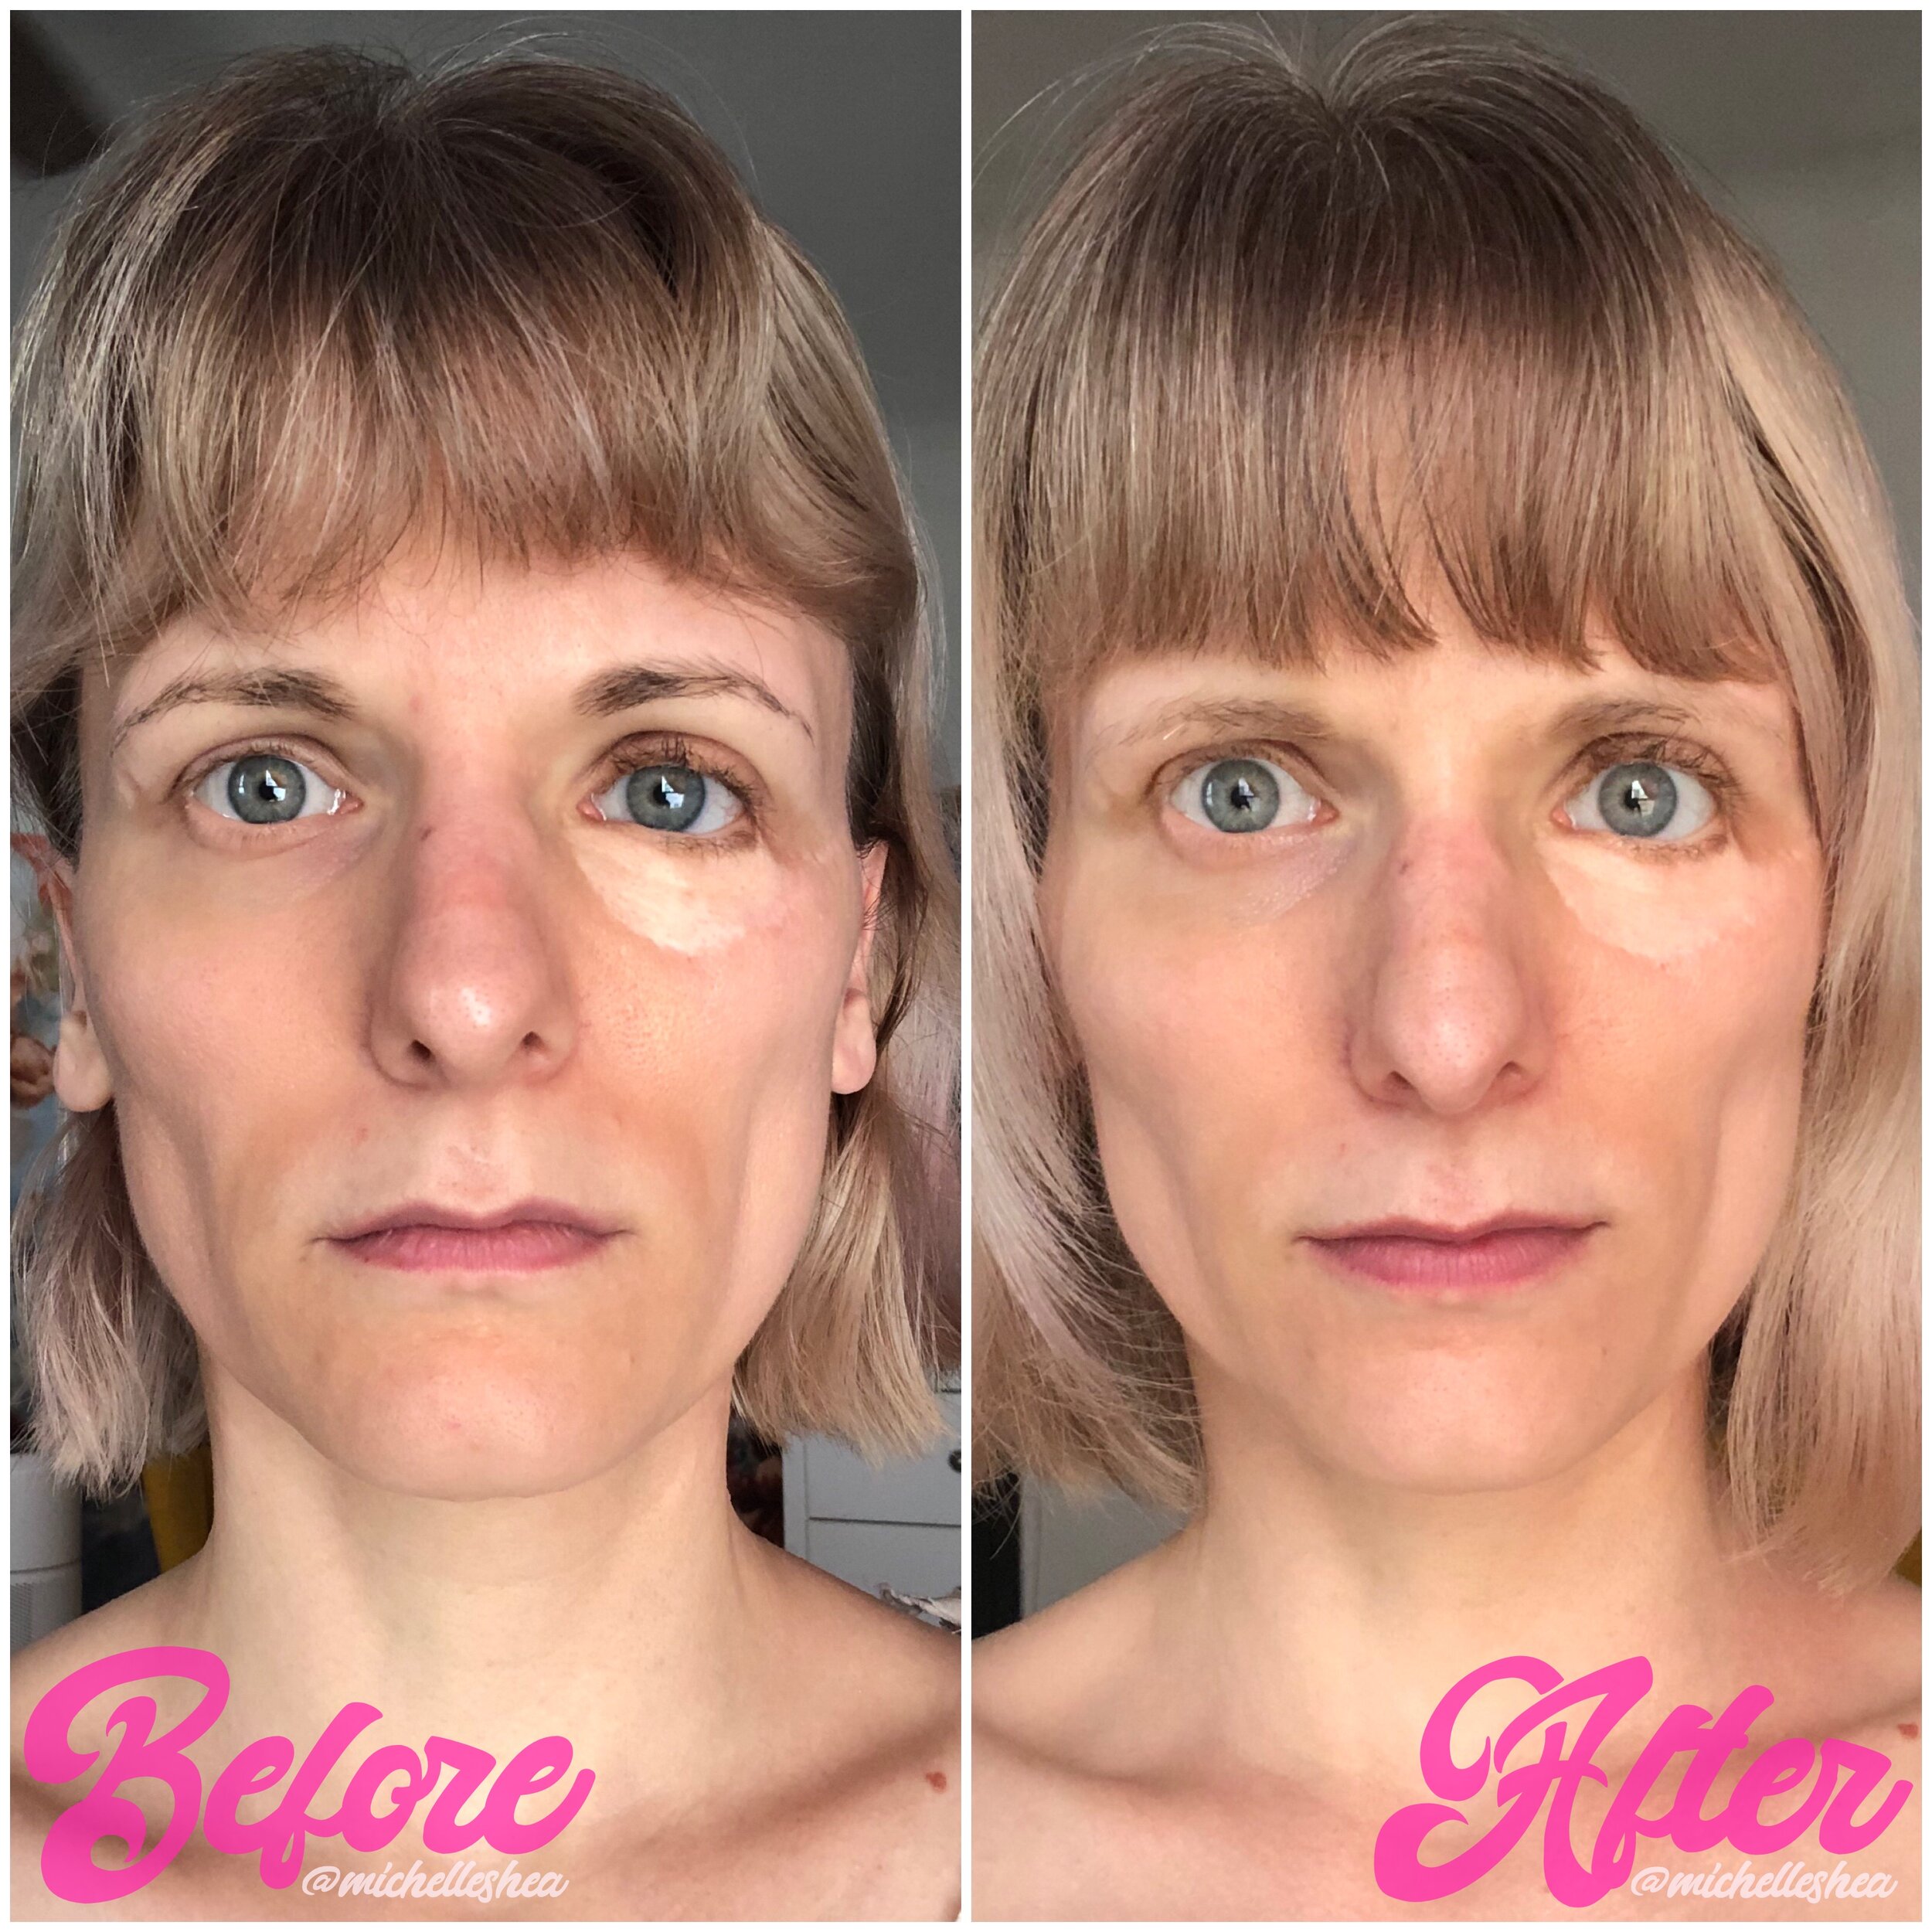 Can mewing actually change the shape of my face?